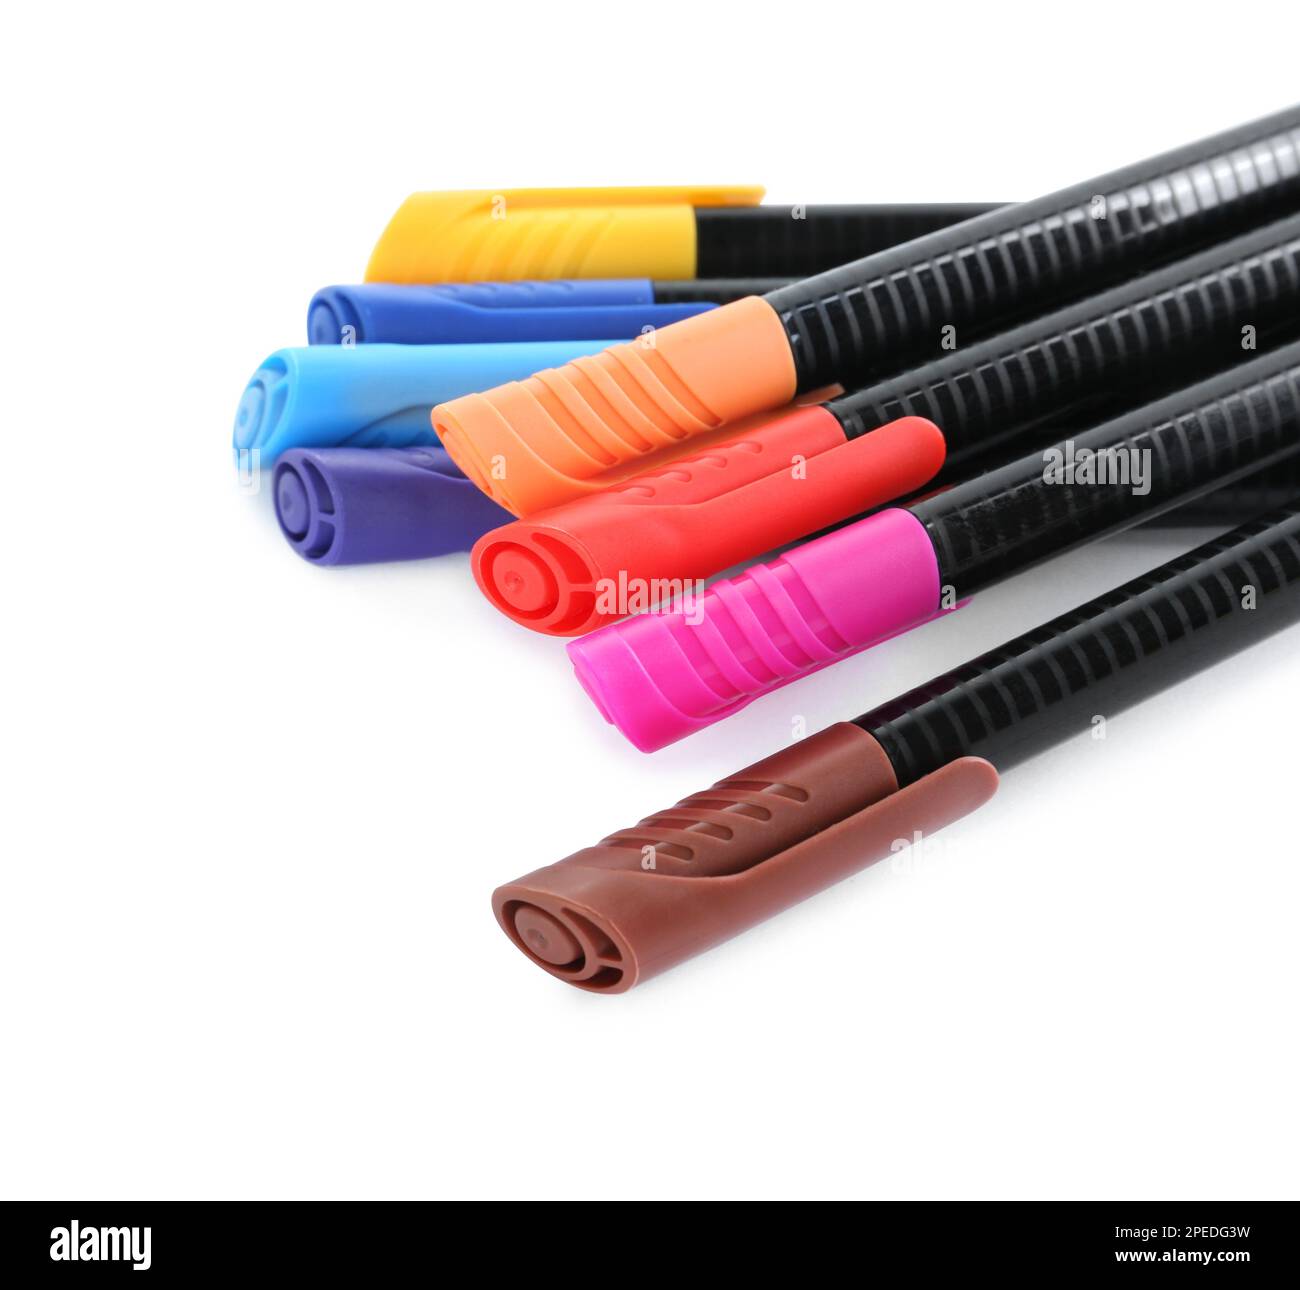 Many colorful markers on white background. School stationery Stock Photo